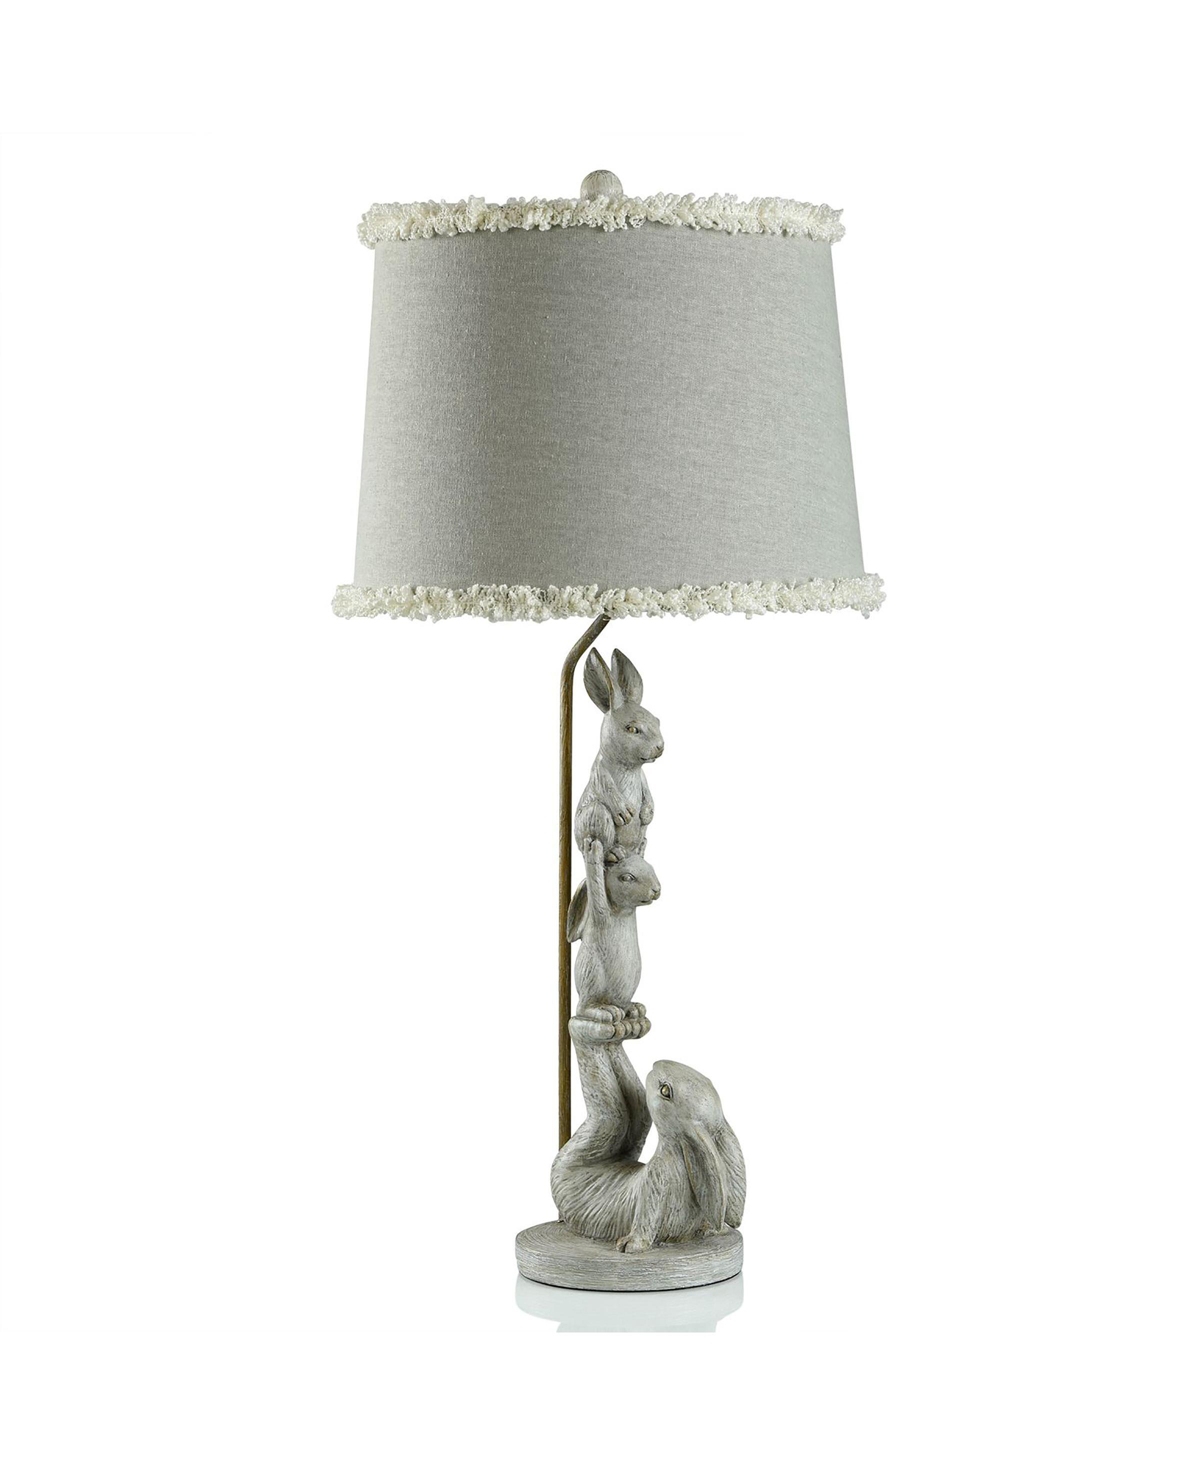 Stylecraft Home Collection 32.5" Chrysta Cream Charming Bunnies Table Lamp With Ruffle Shade In Gray,gold,faux Cement